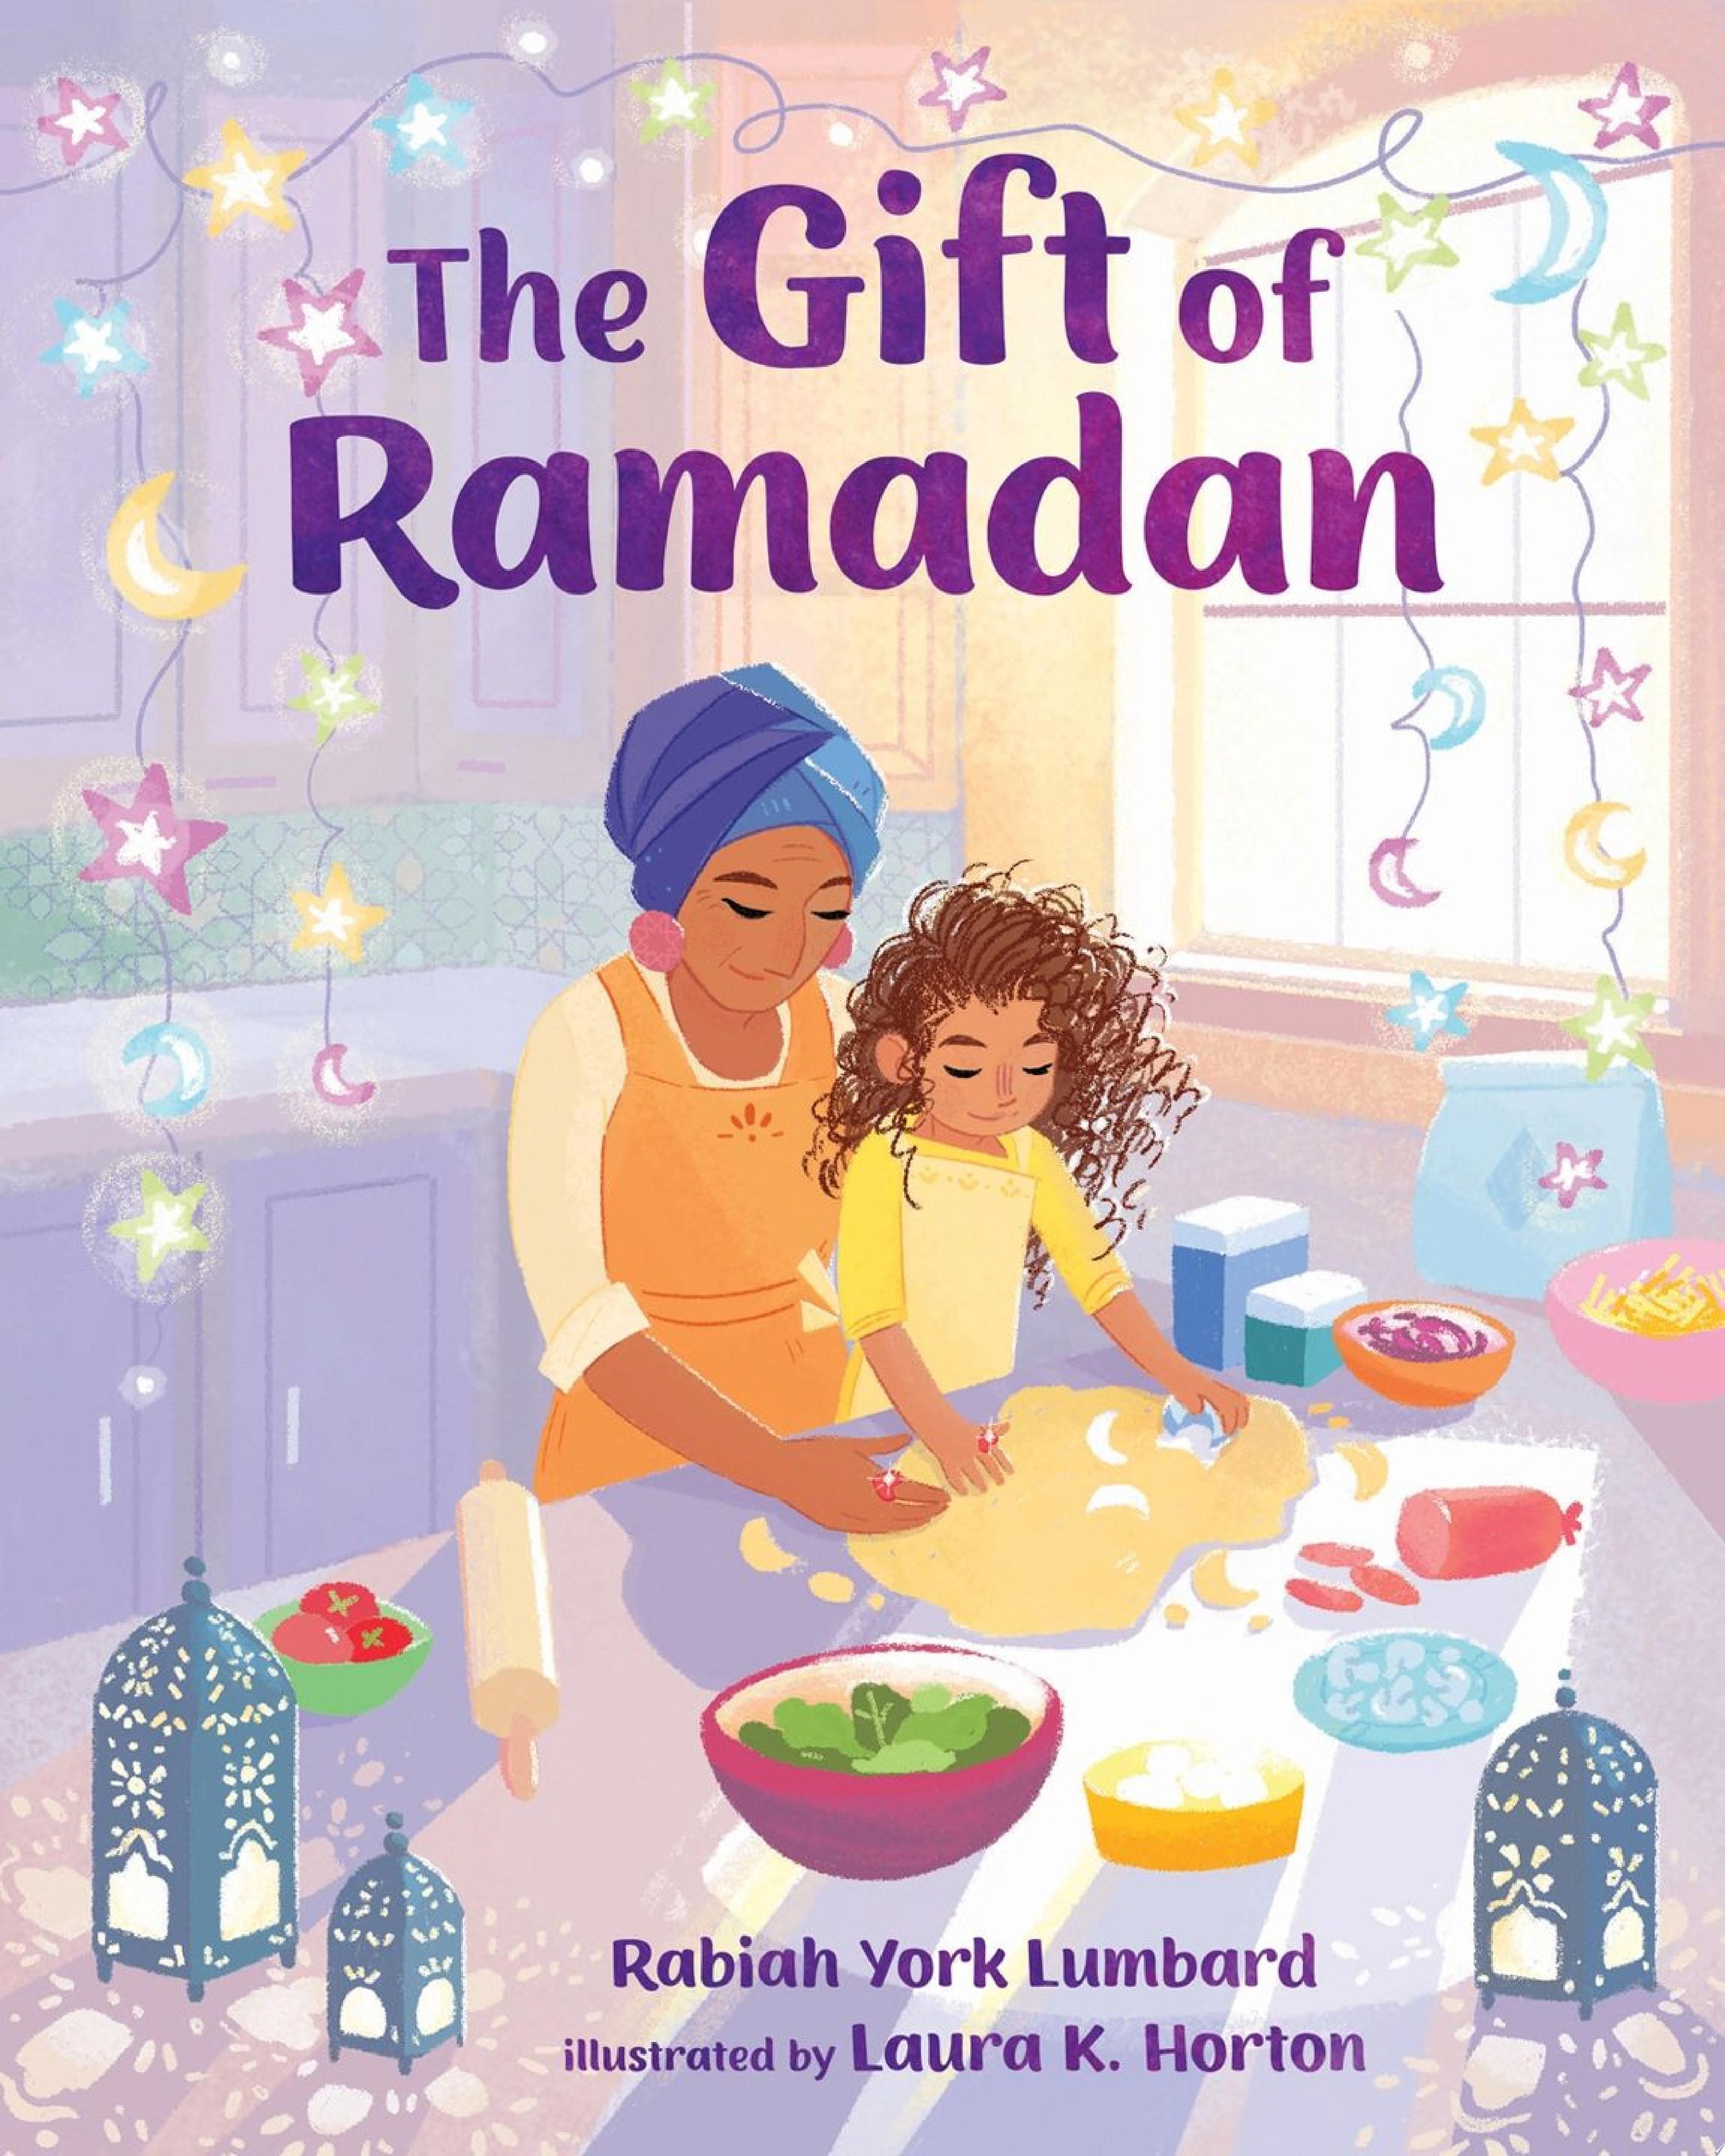 Image for "The Gift of Ramadan"